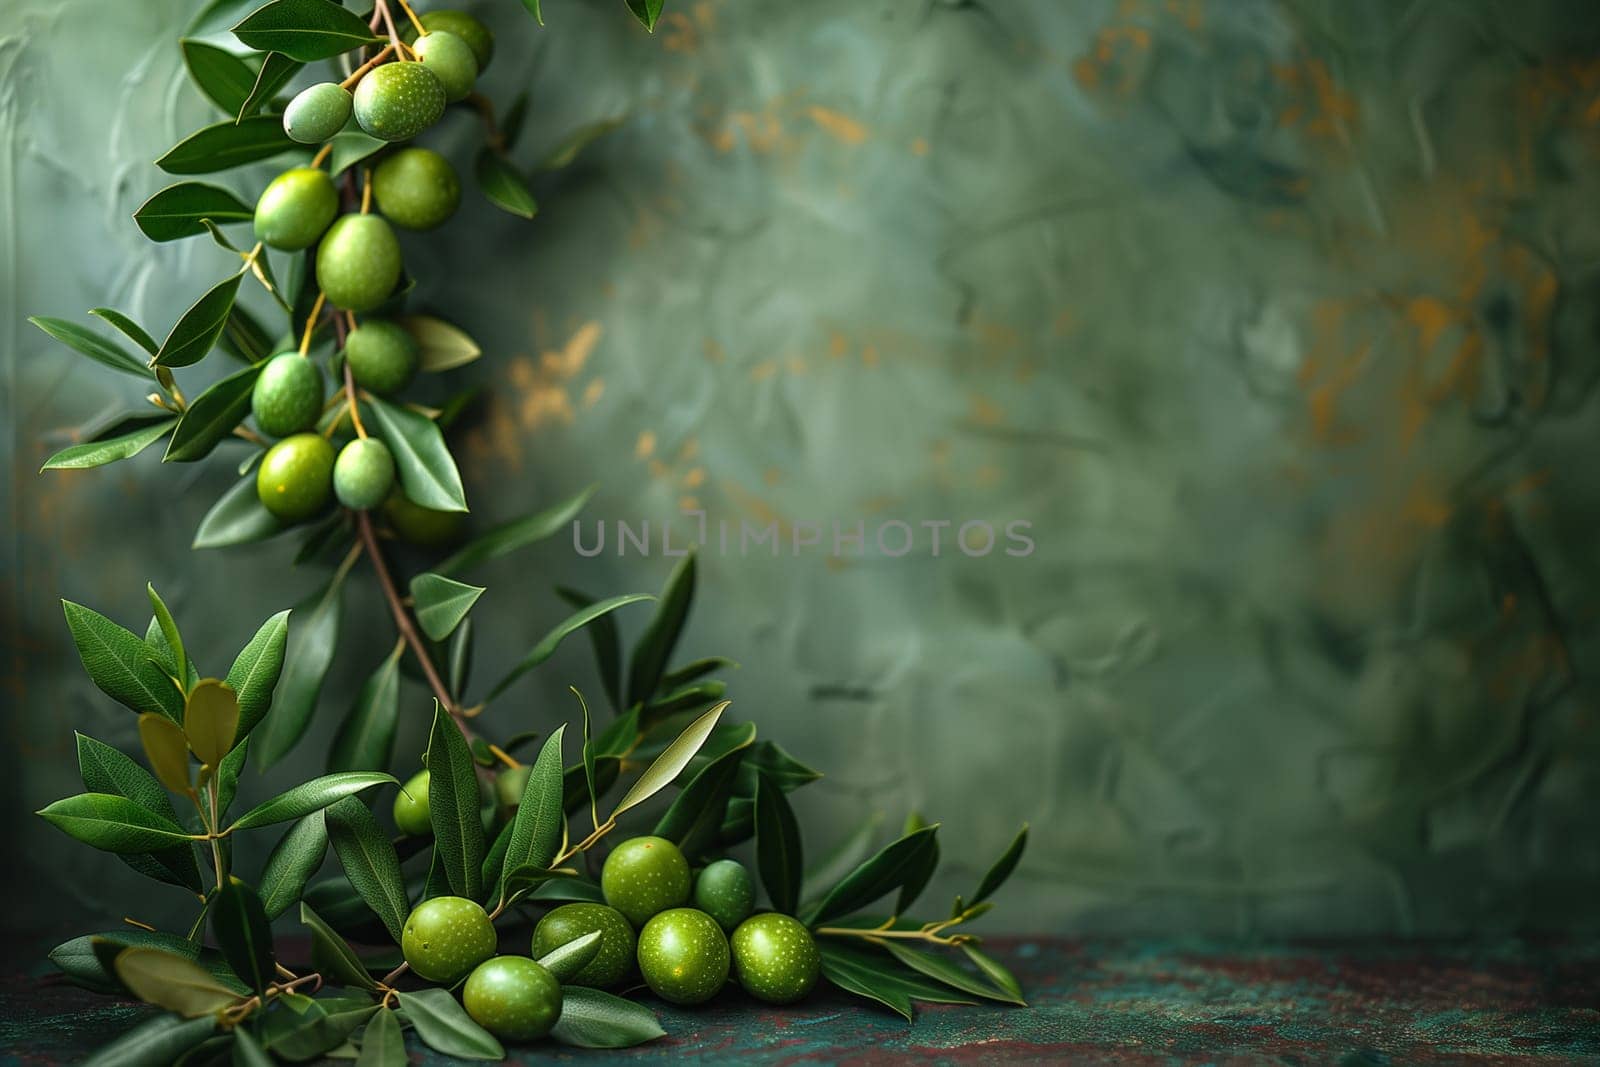 Fresh Green Olives on Branch Against Textured Background by Sd28DimoN_1976